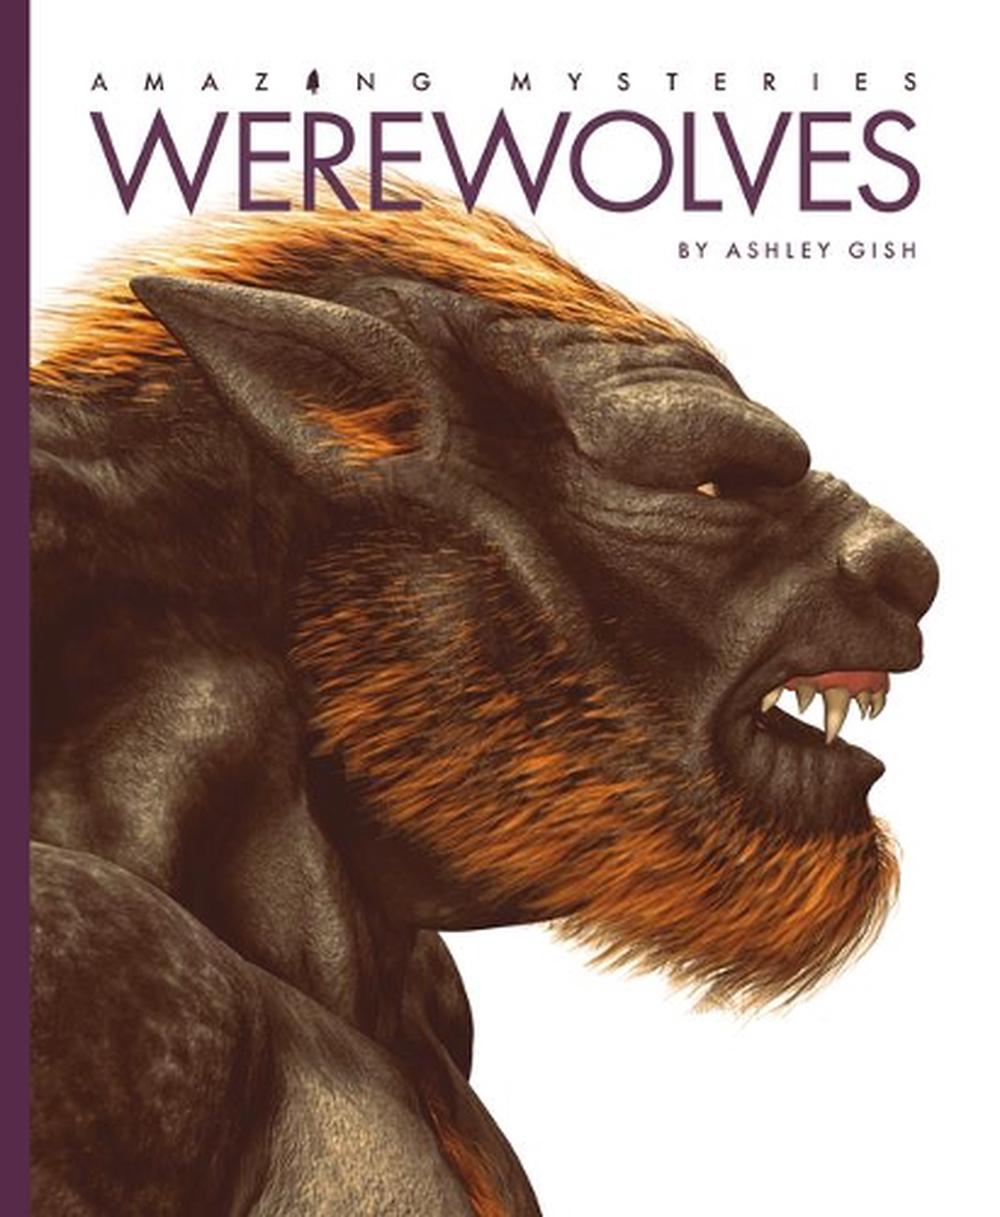 stephen king book about werewolves